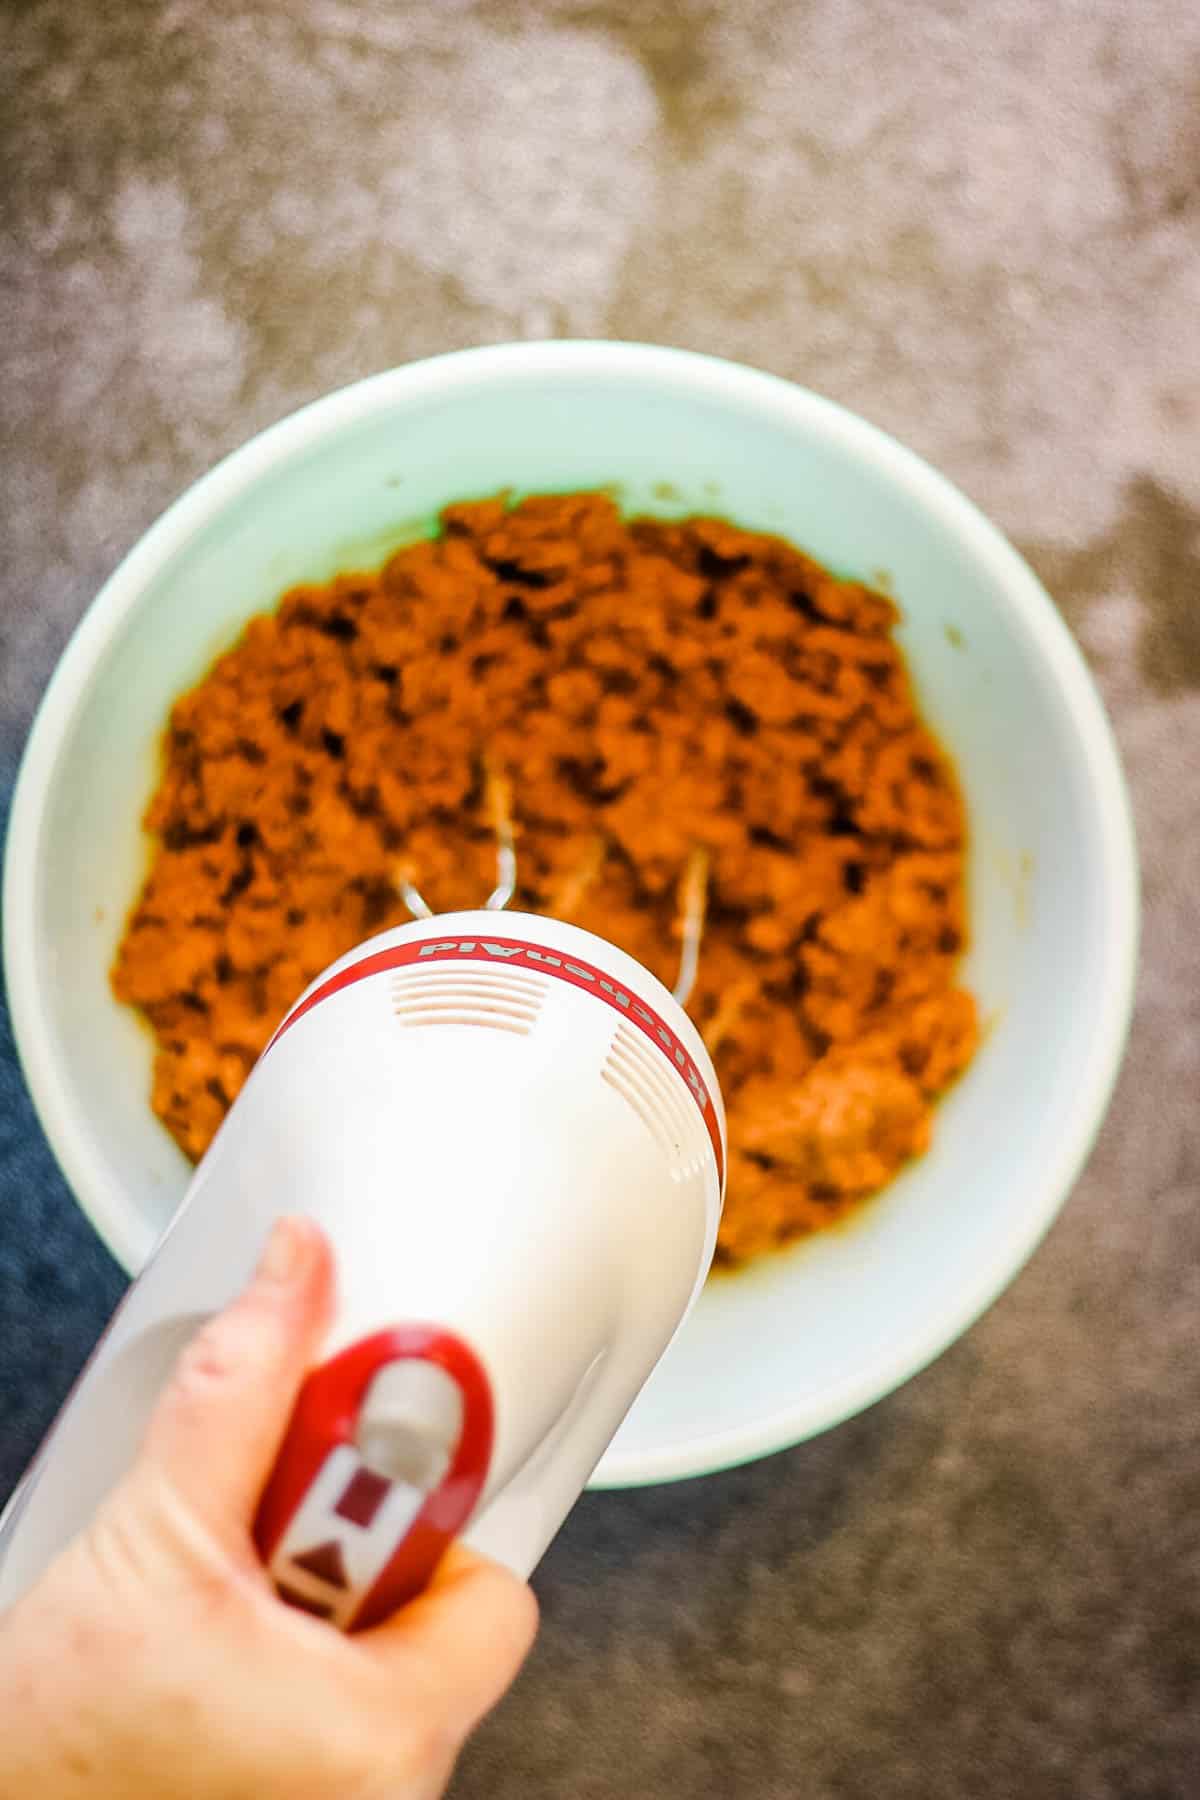 A person using a hand mixer to mix ingredients for ginger snap cookies in a bowl.